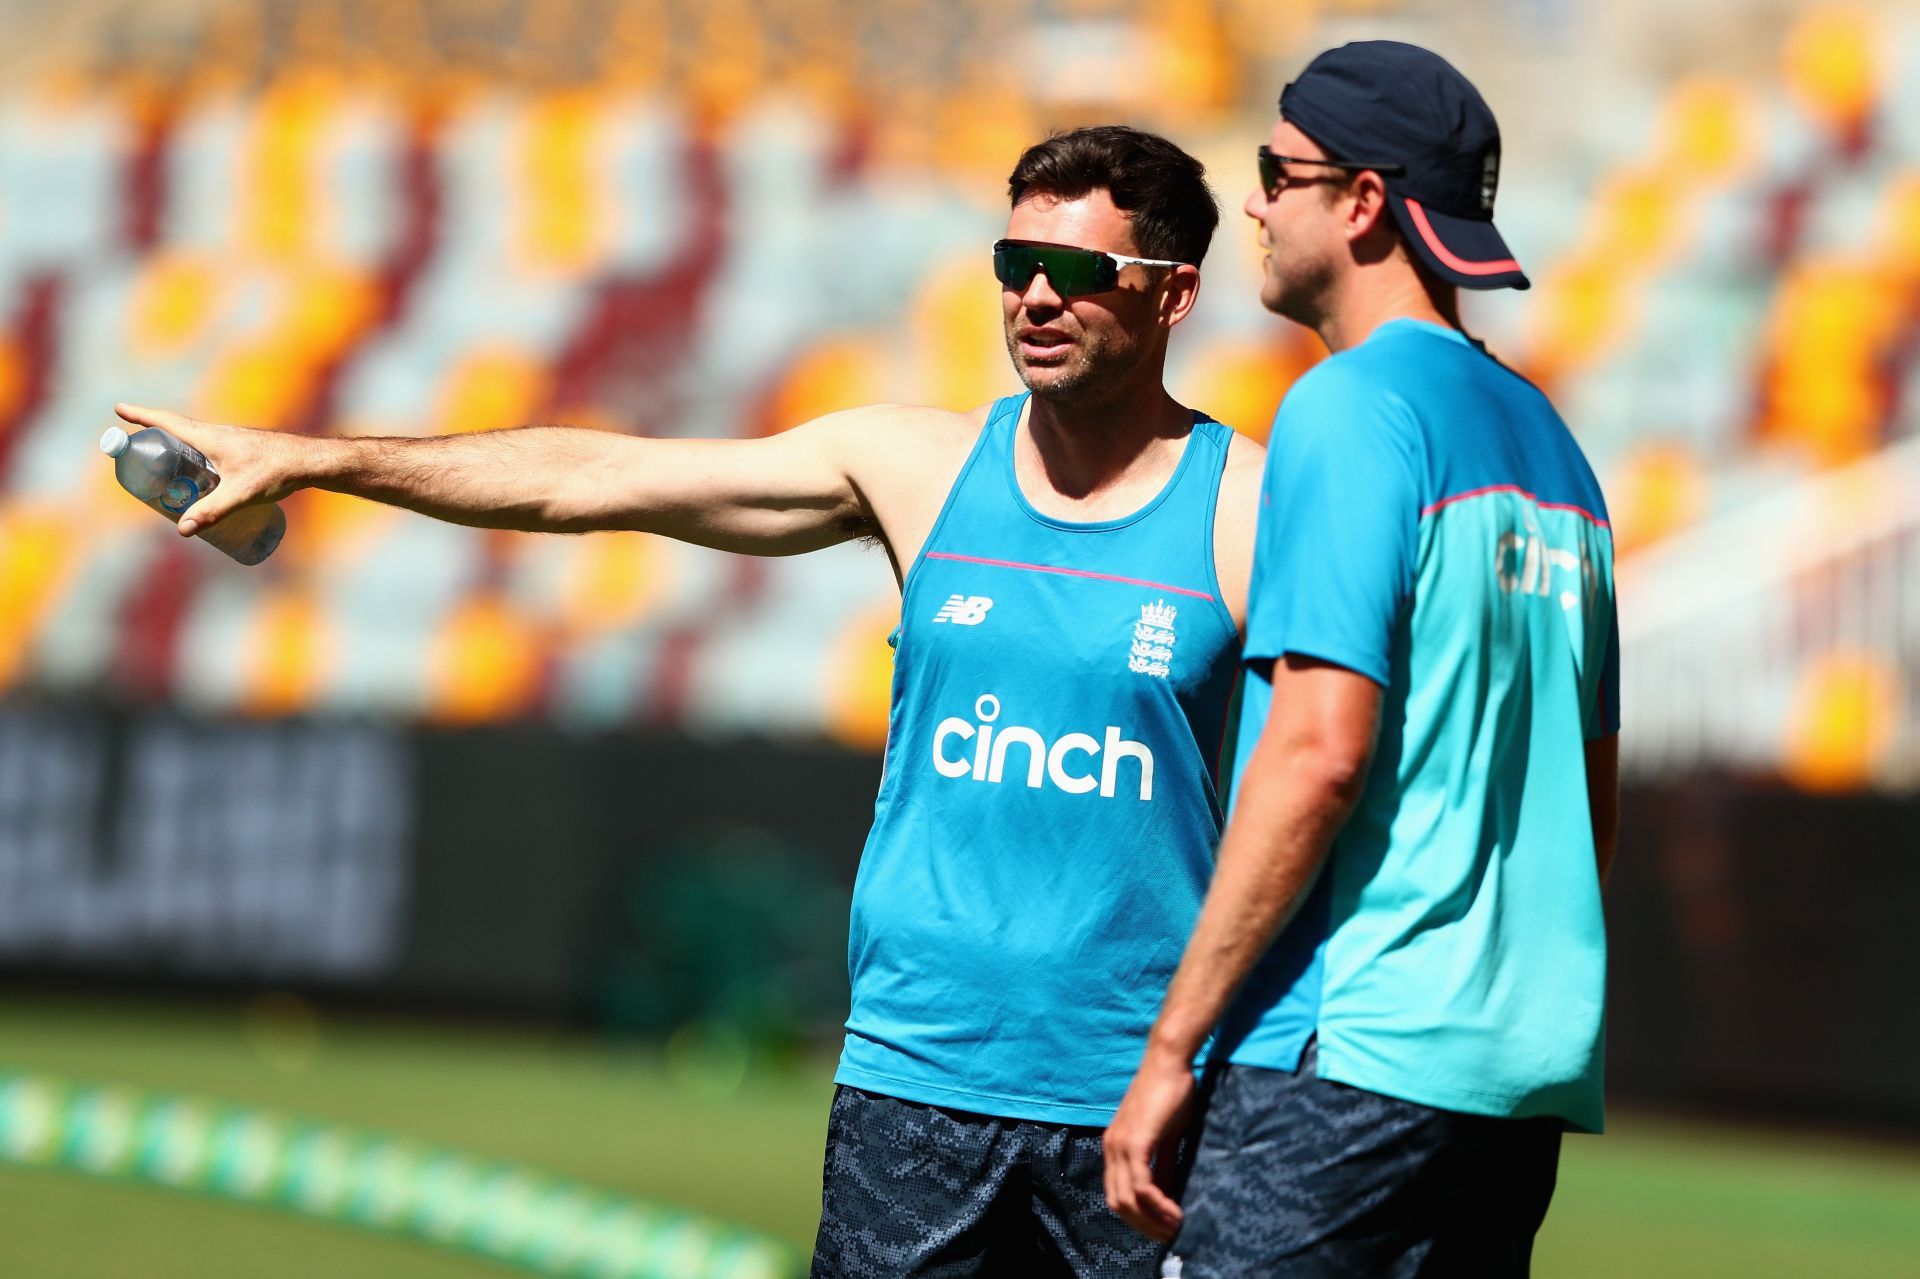 James Anderson and Stuart Broad. (Credits: Twitter)